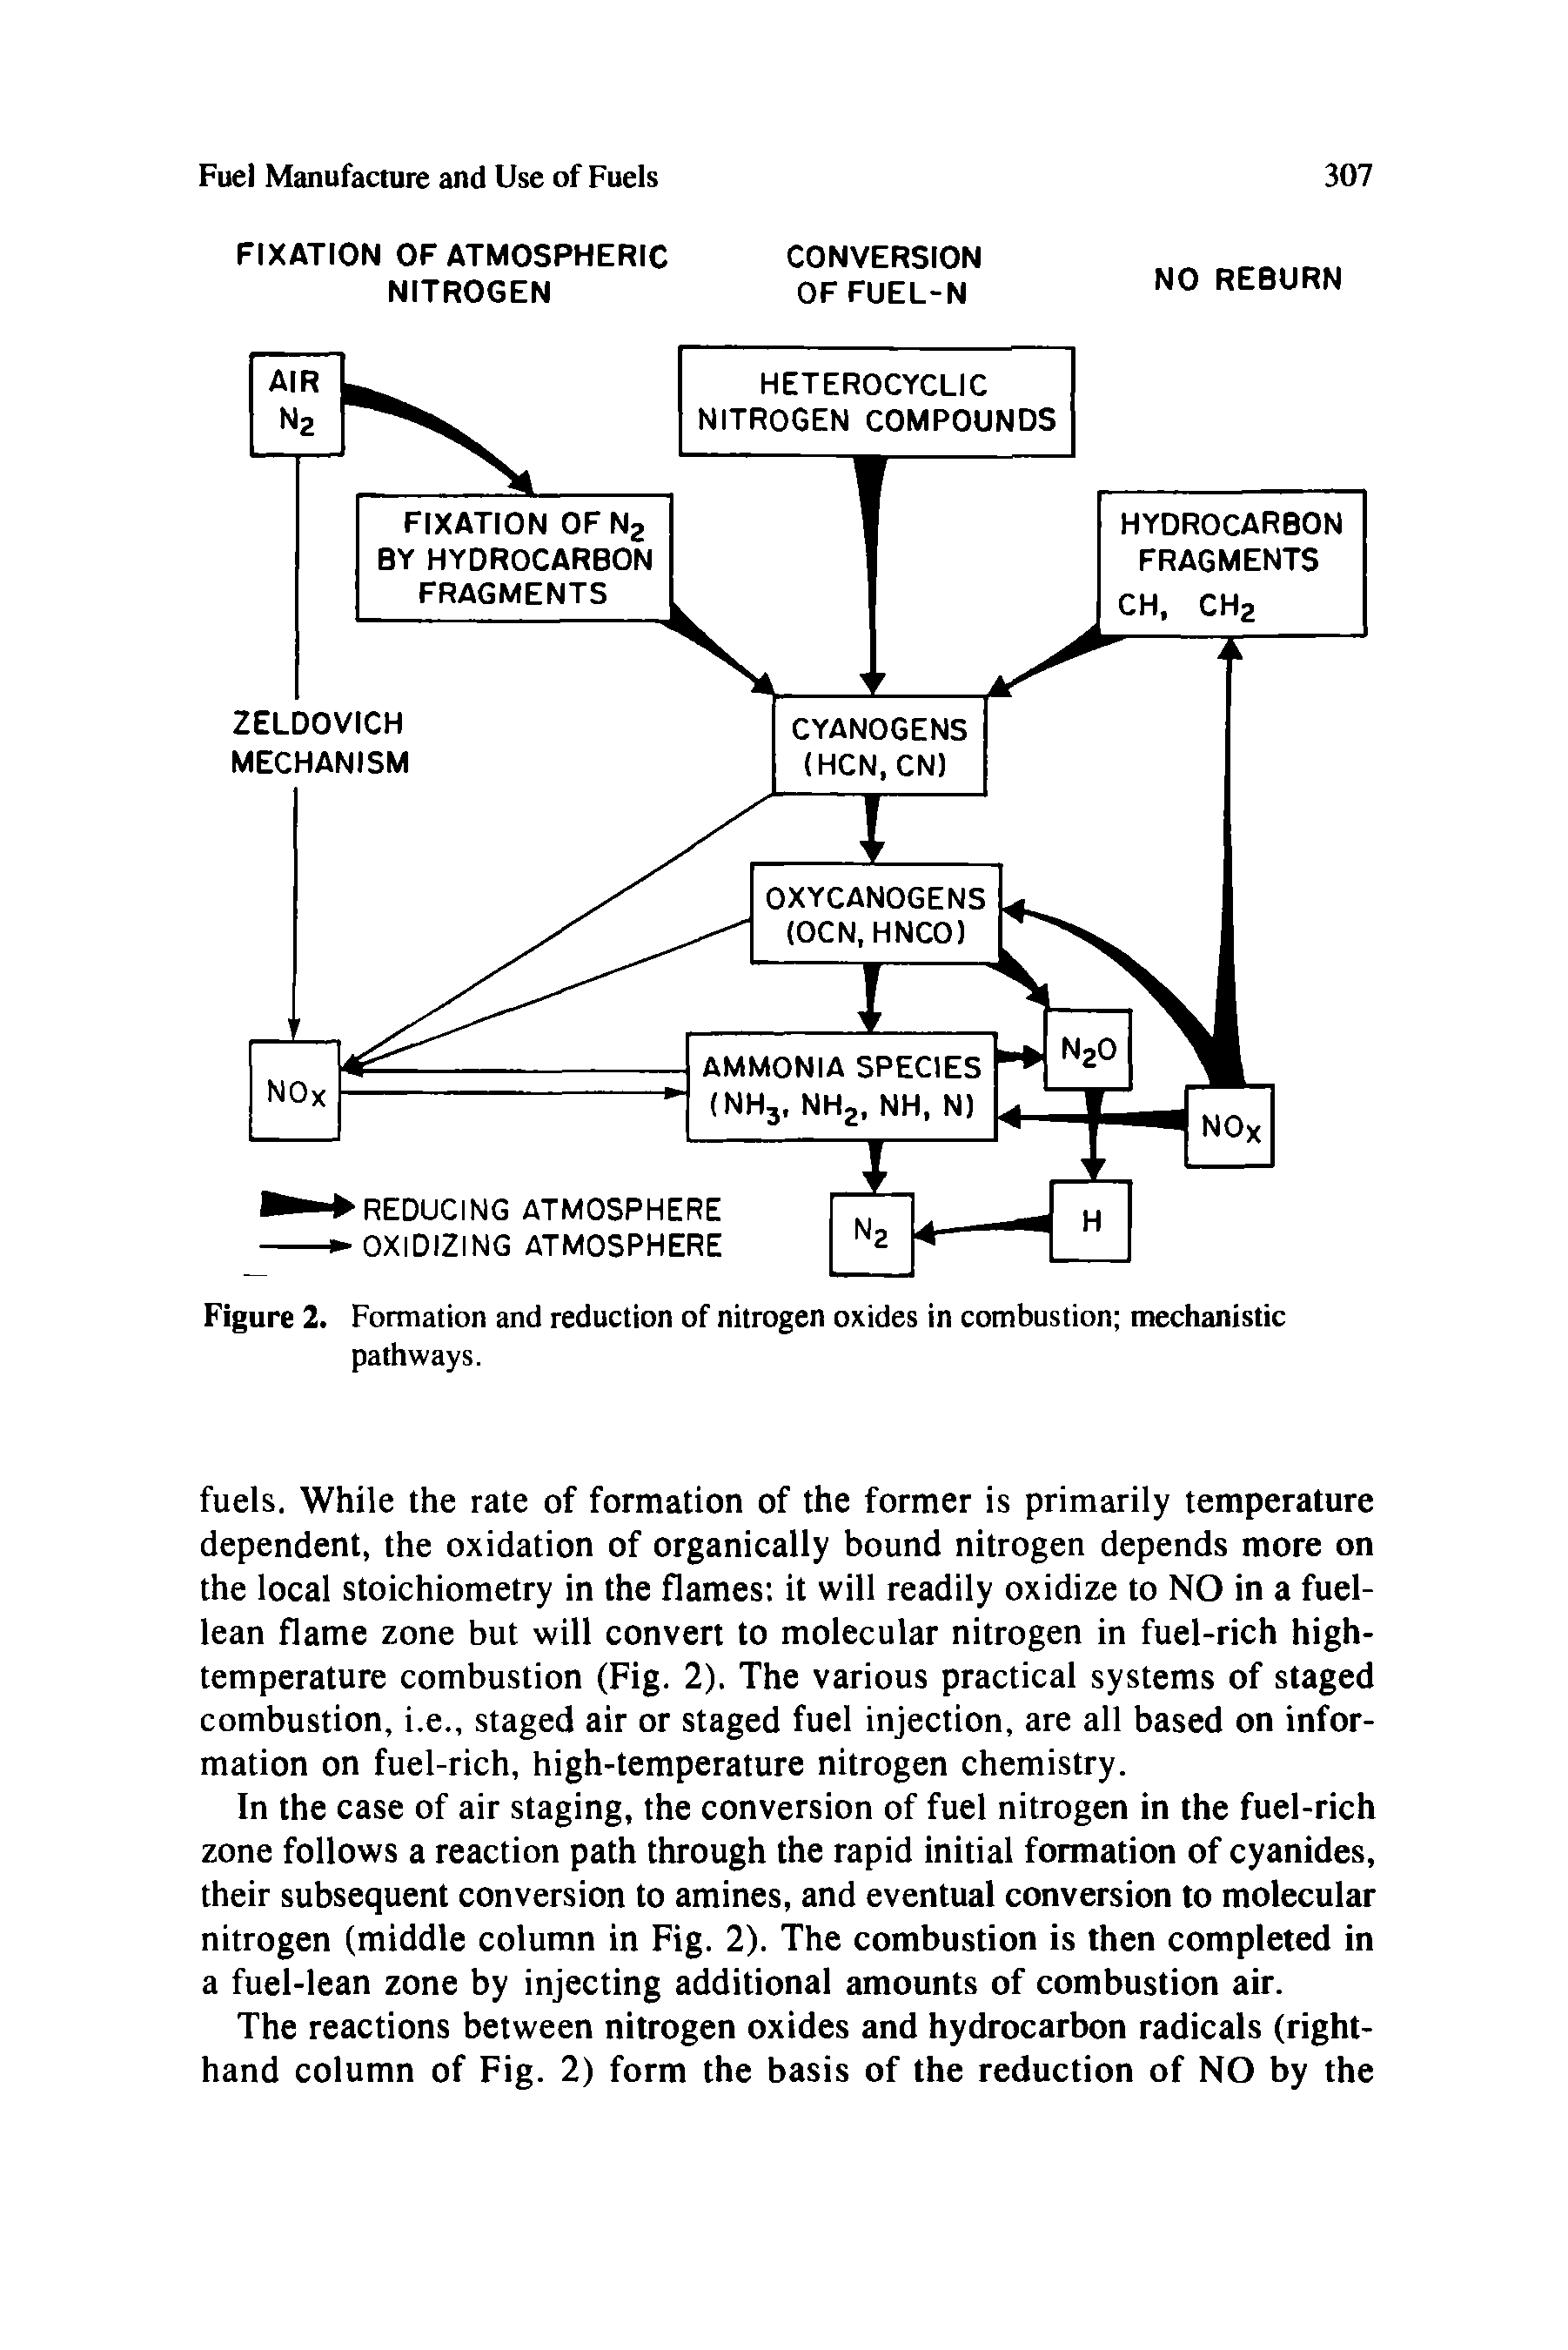 Figure 2. Formation and reduction of nitrogen oxides in combustion mechanistic pathways.